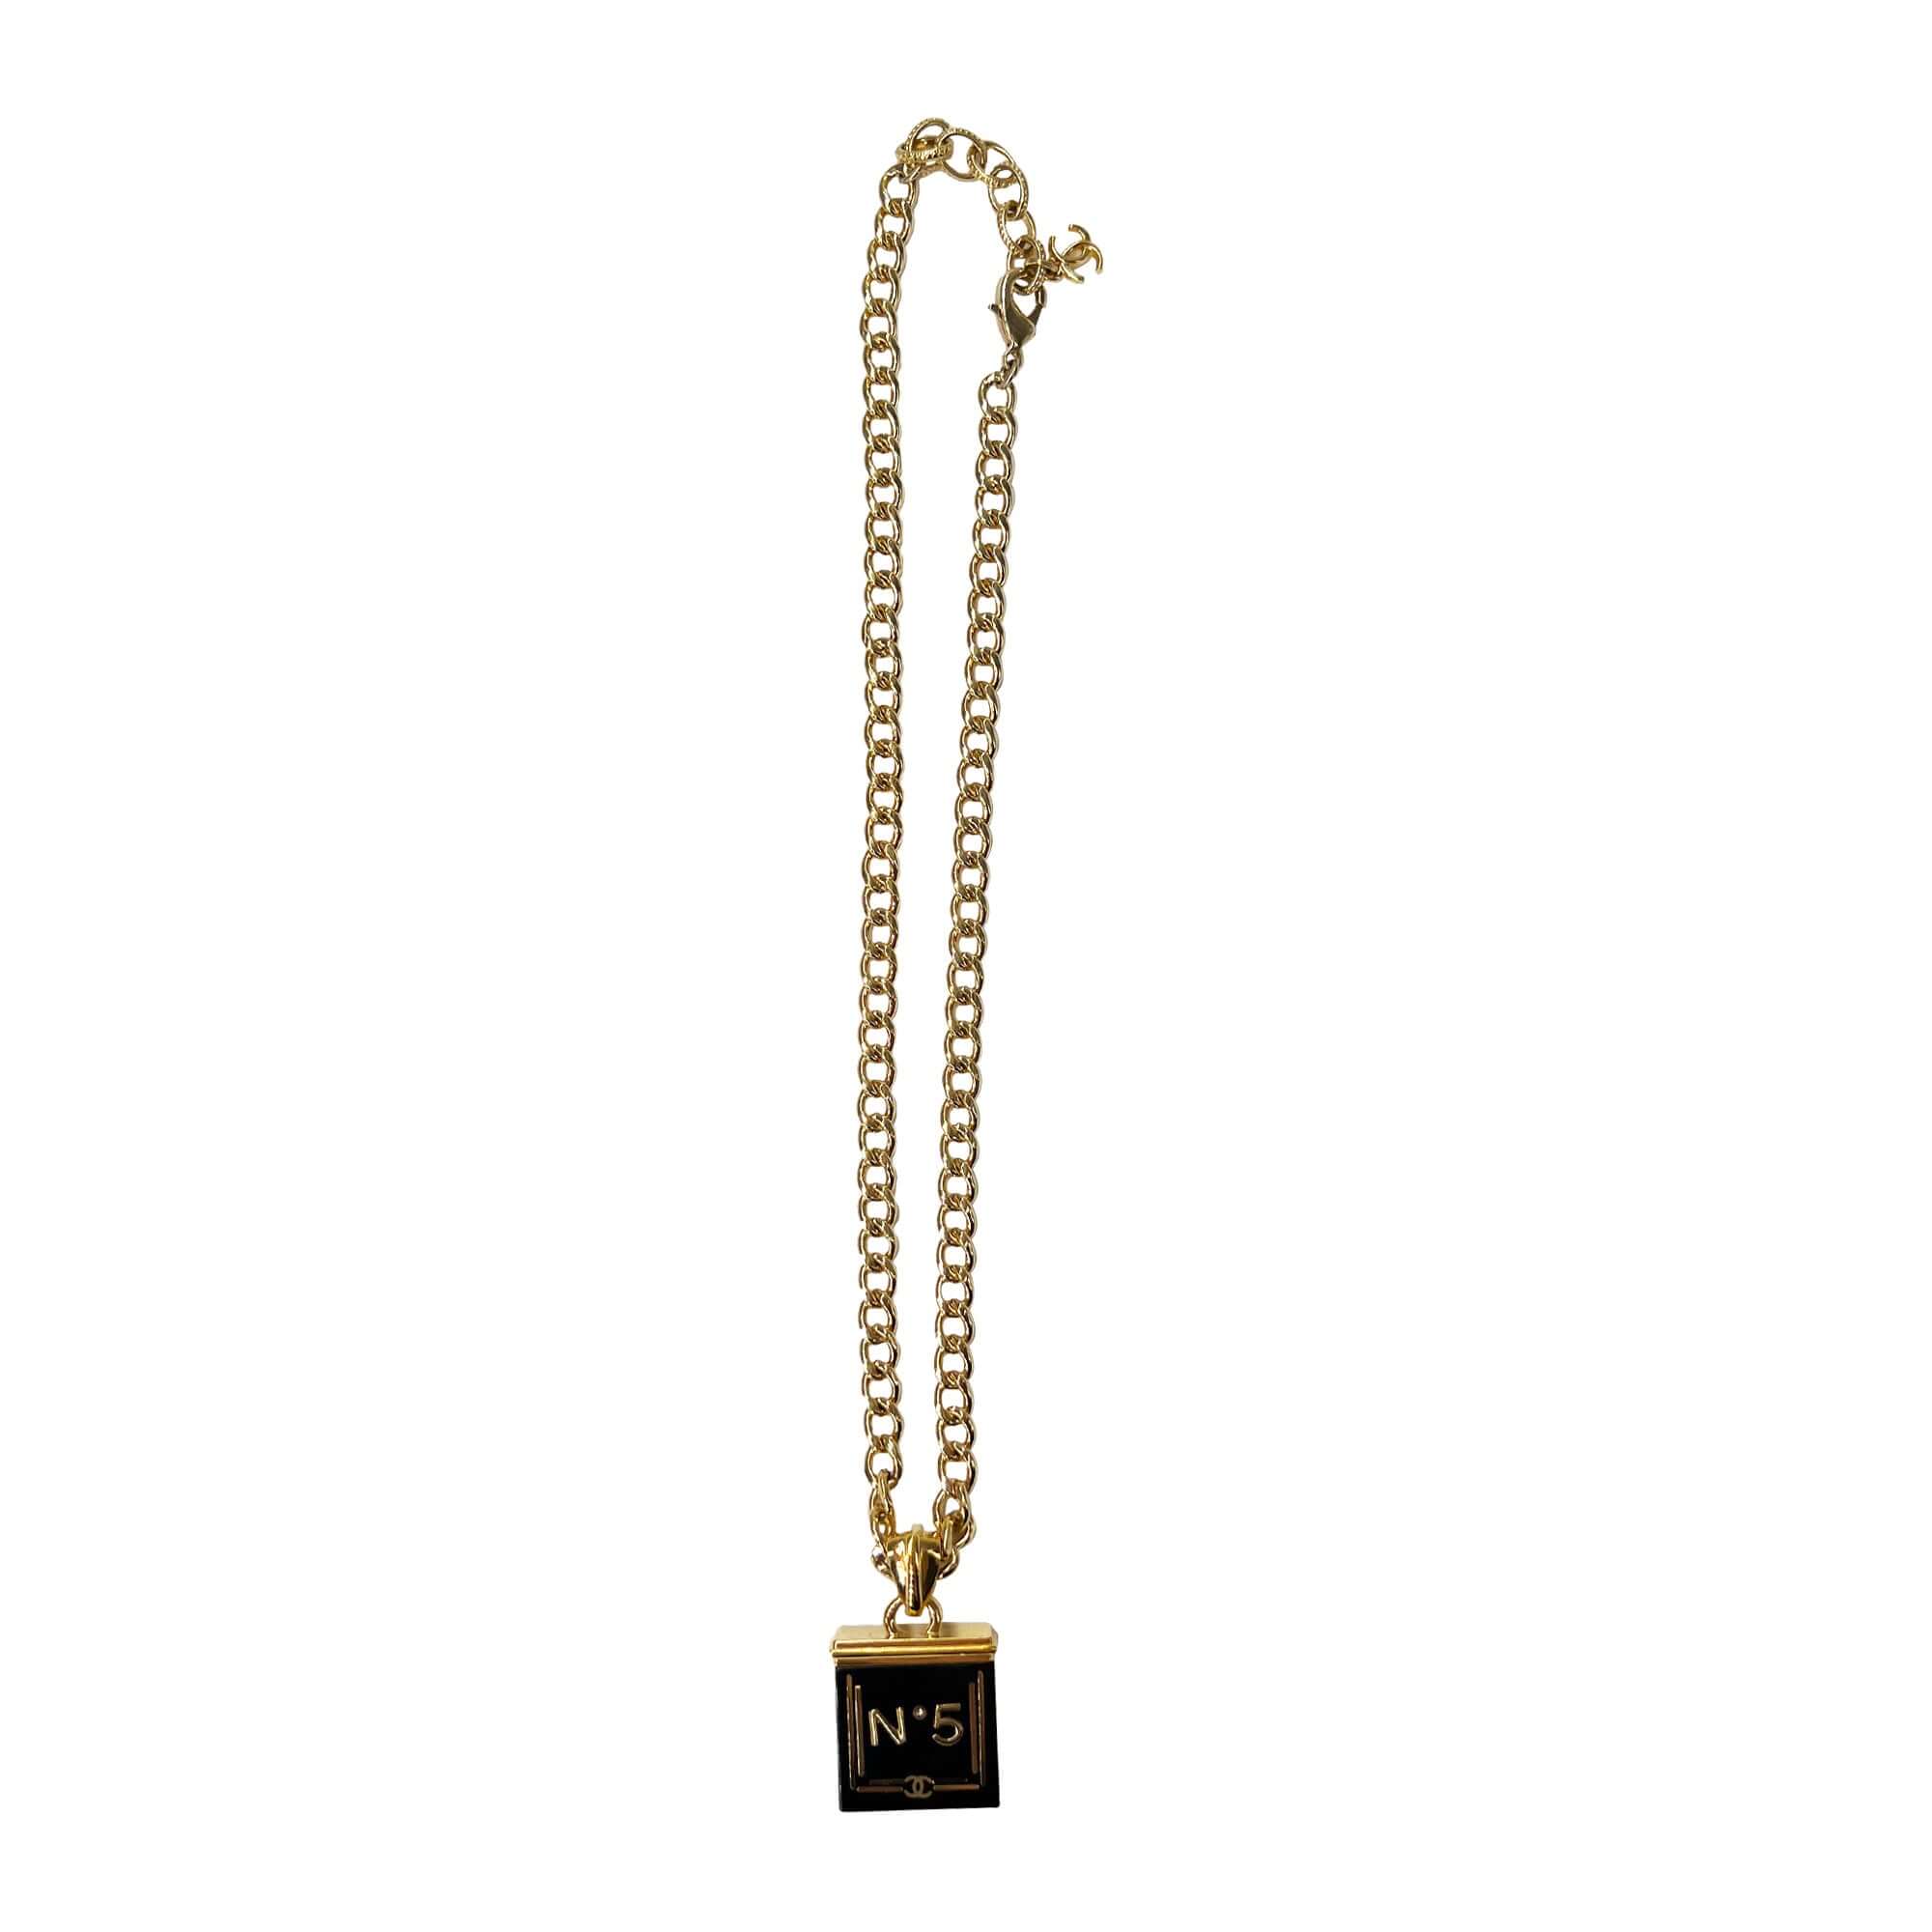 Chanel gold tone black and white necklace